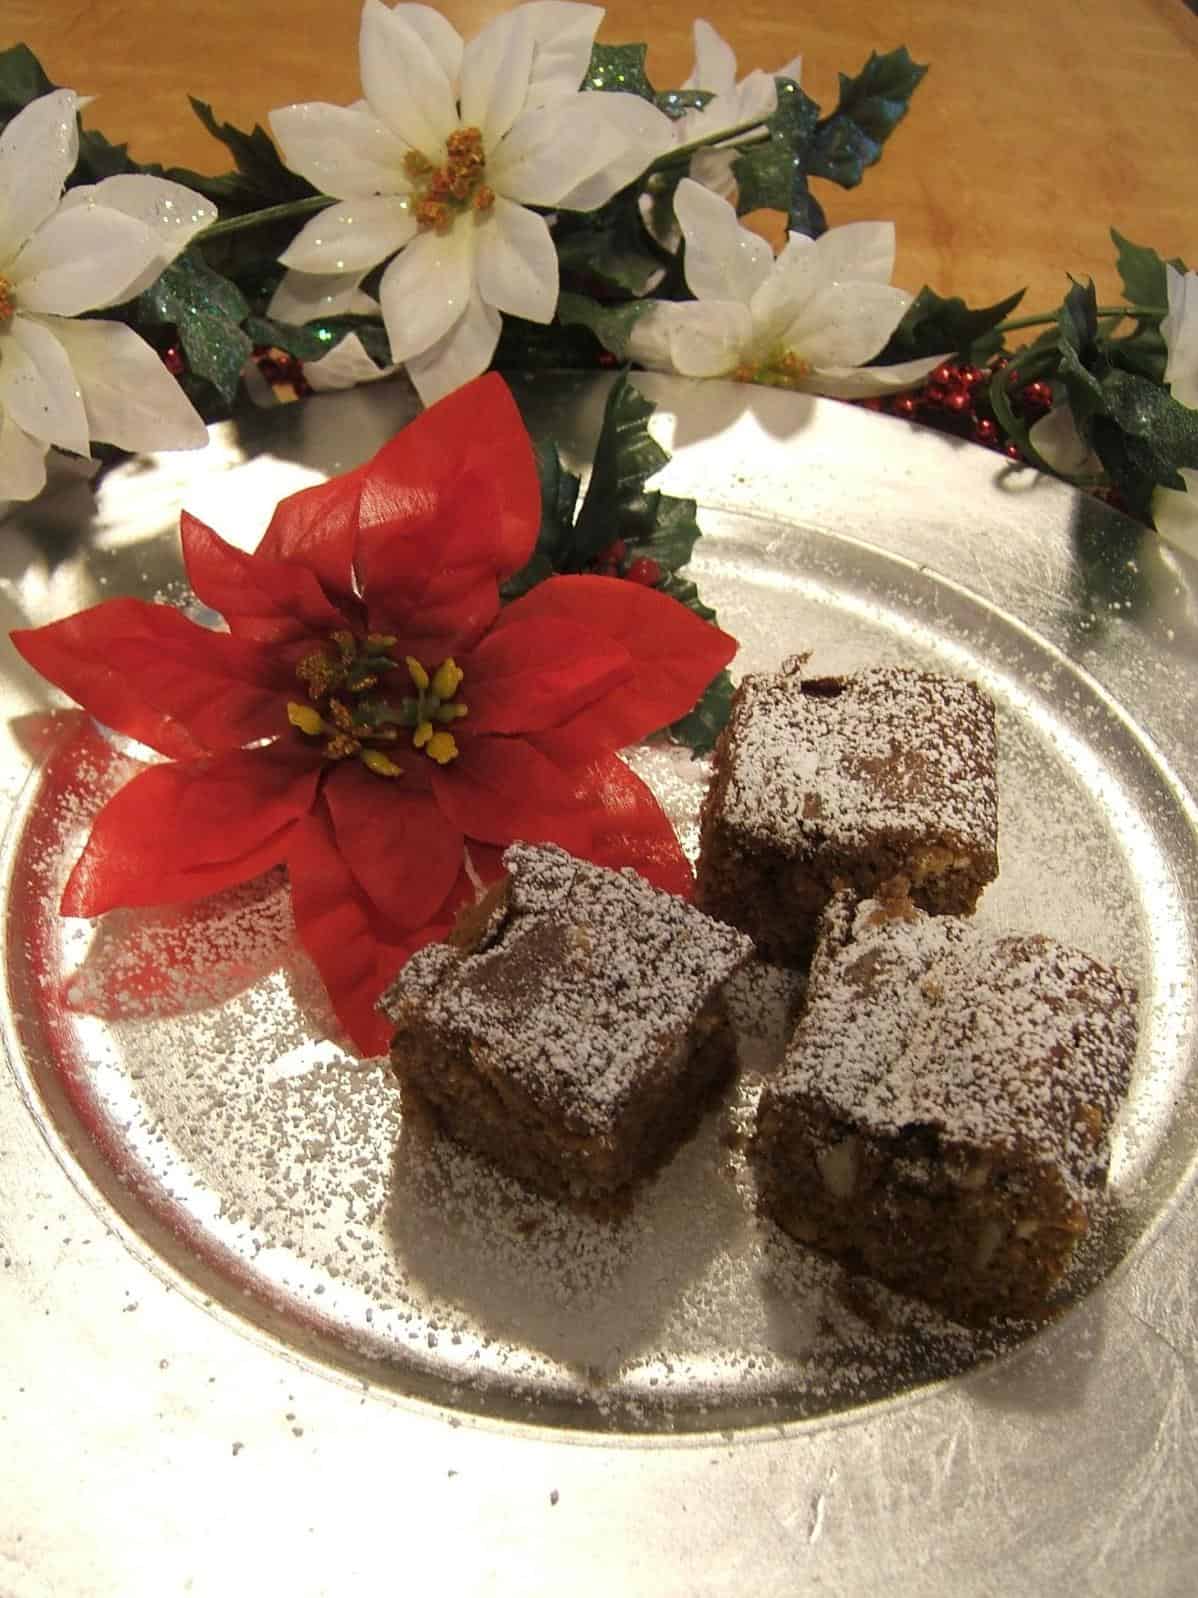  Let the aroma of cinnamon and nutmeg fill your kitchen with this delicious Sinterklaas cake.